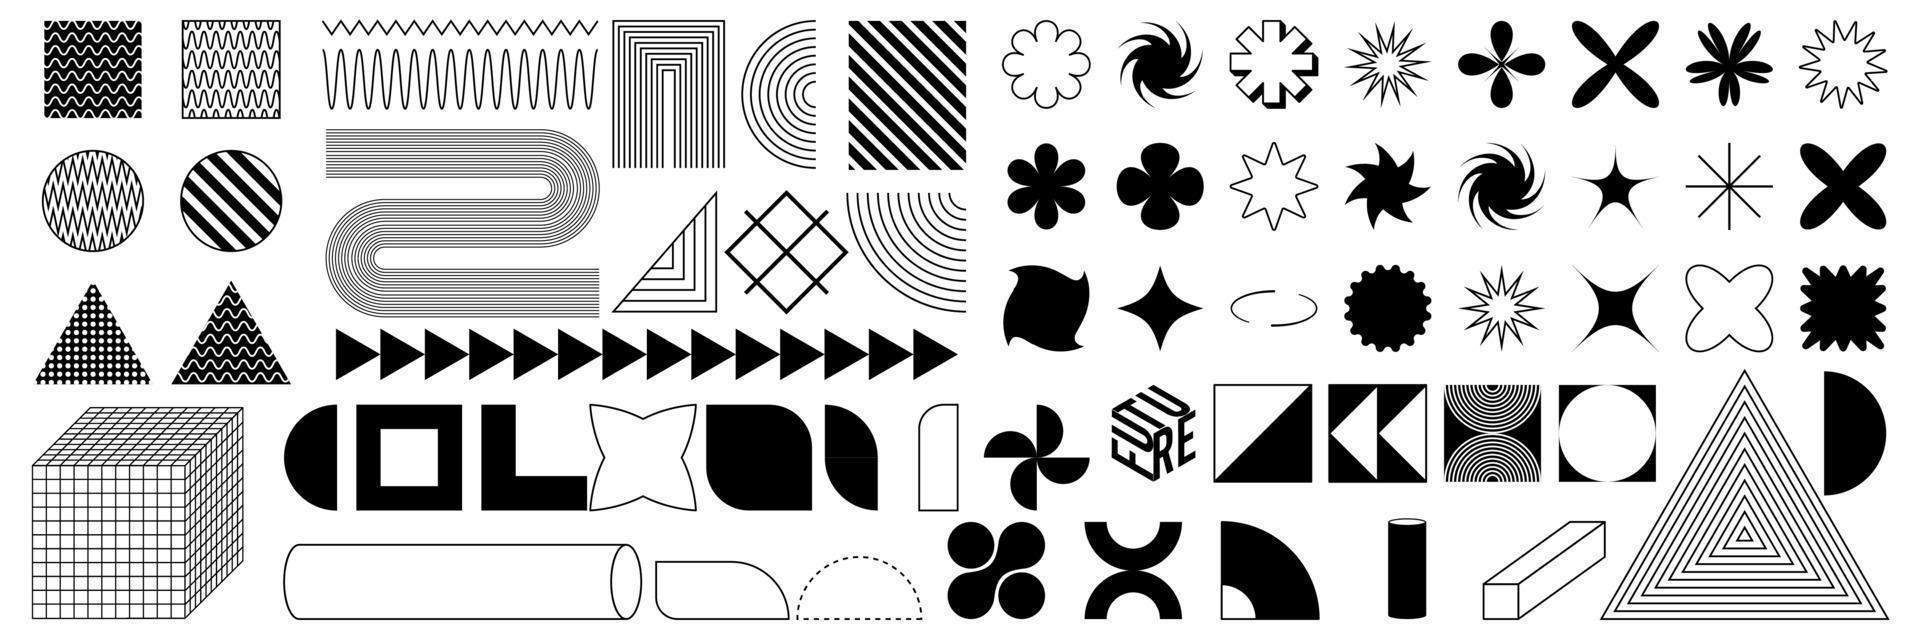 Abstract geometric design elements. Modern shapes in trendy retro style. Memphis design. vector